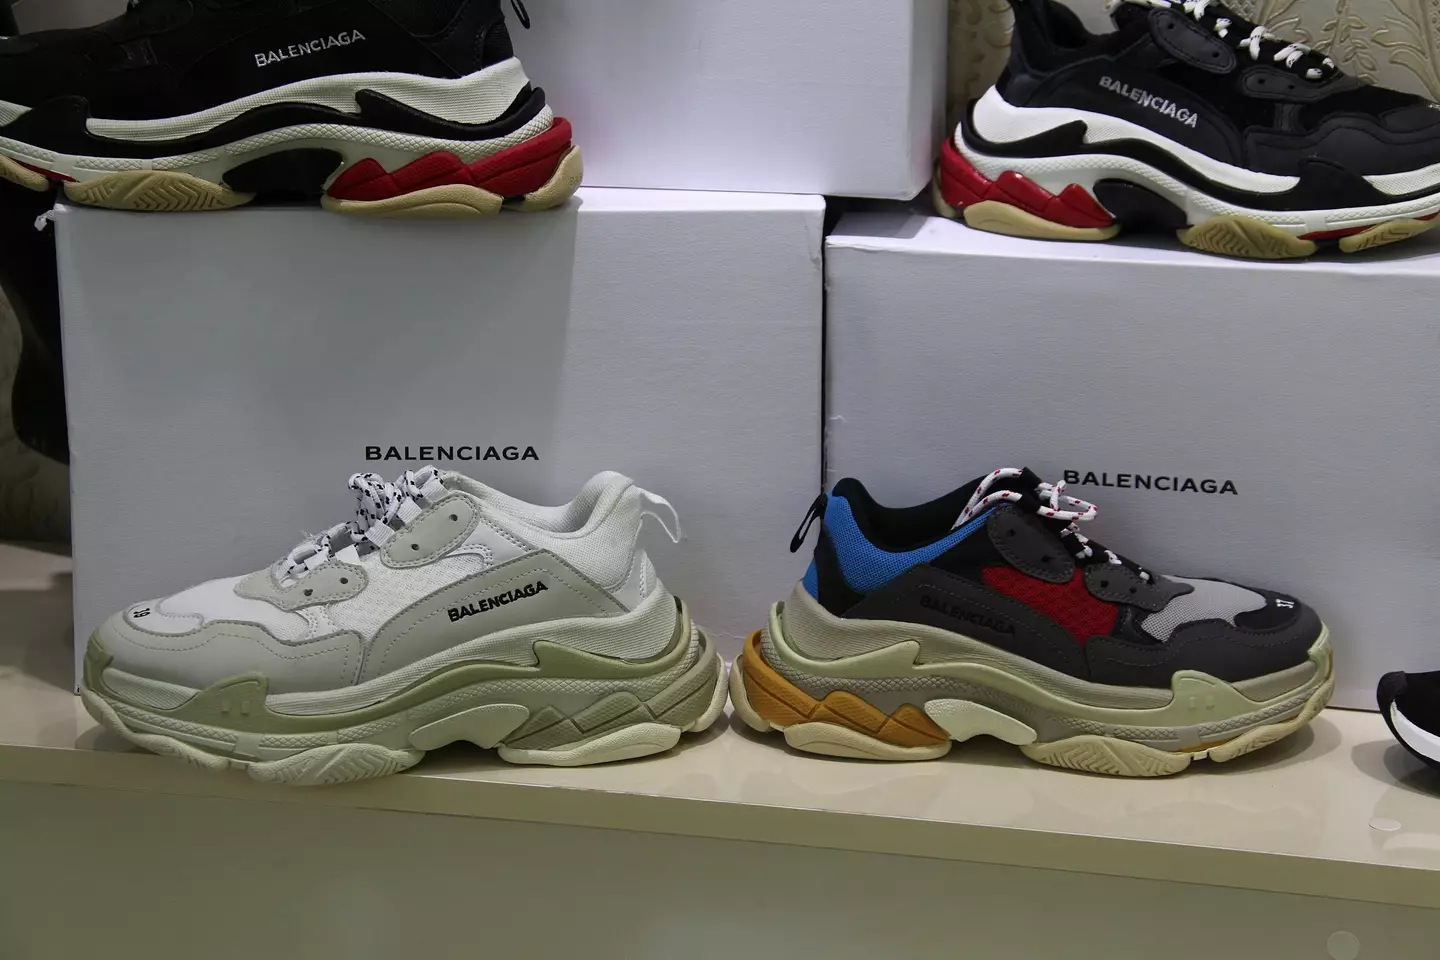 Balenciaga says they will launch legal action against the creator of the ad.